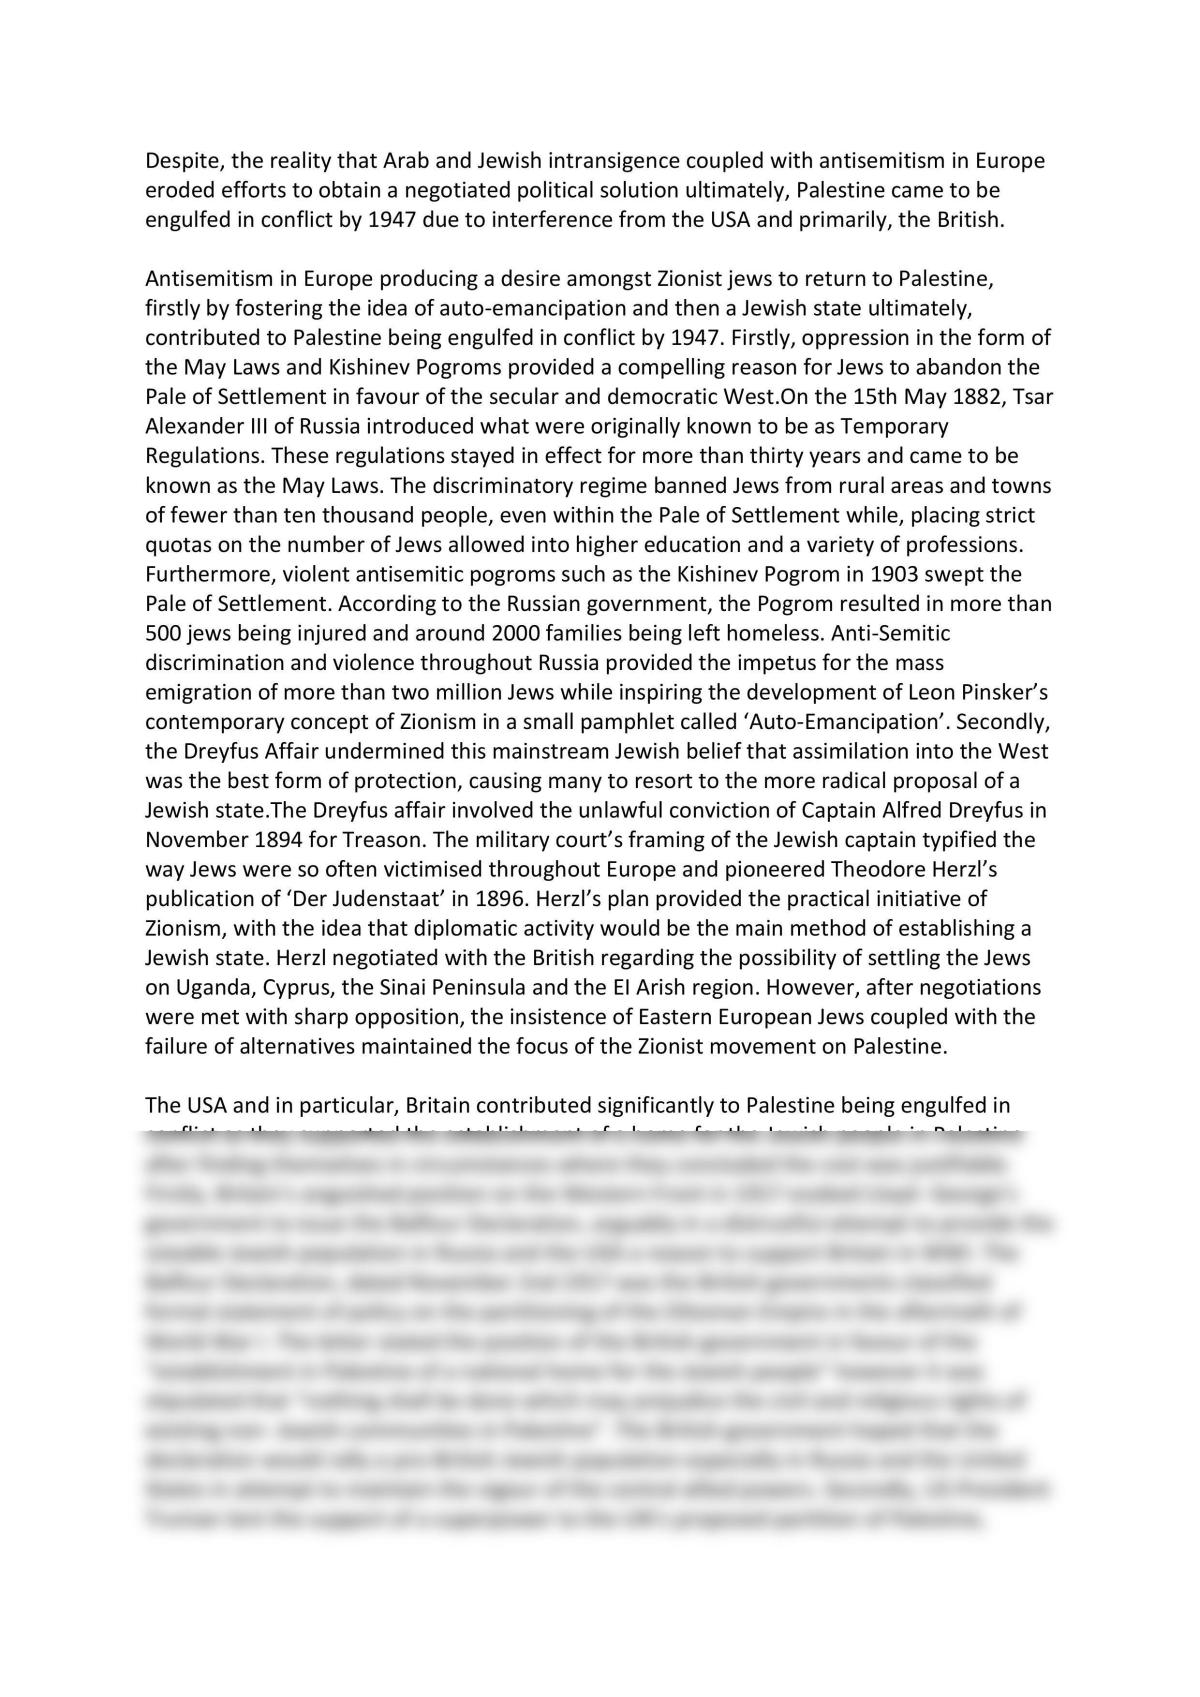 Notes + Essay about the Arab-Israeli Conflict  - Page 1